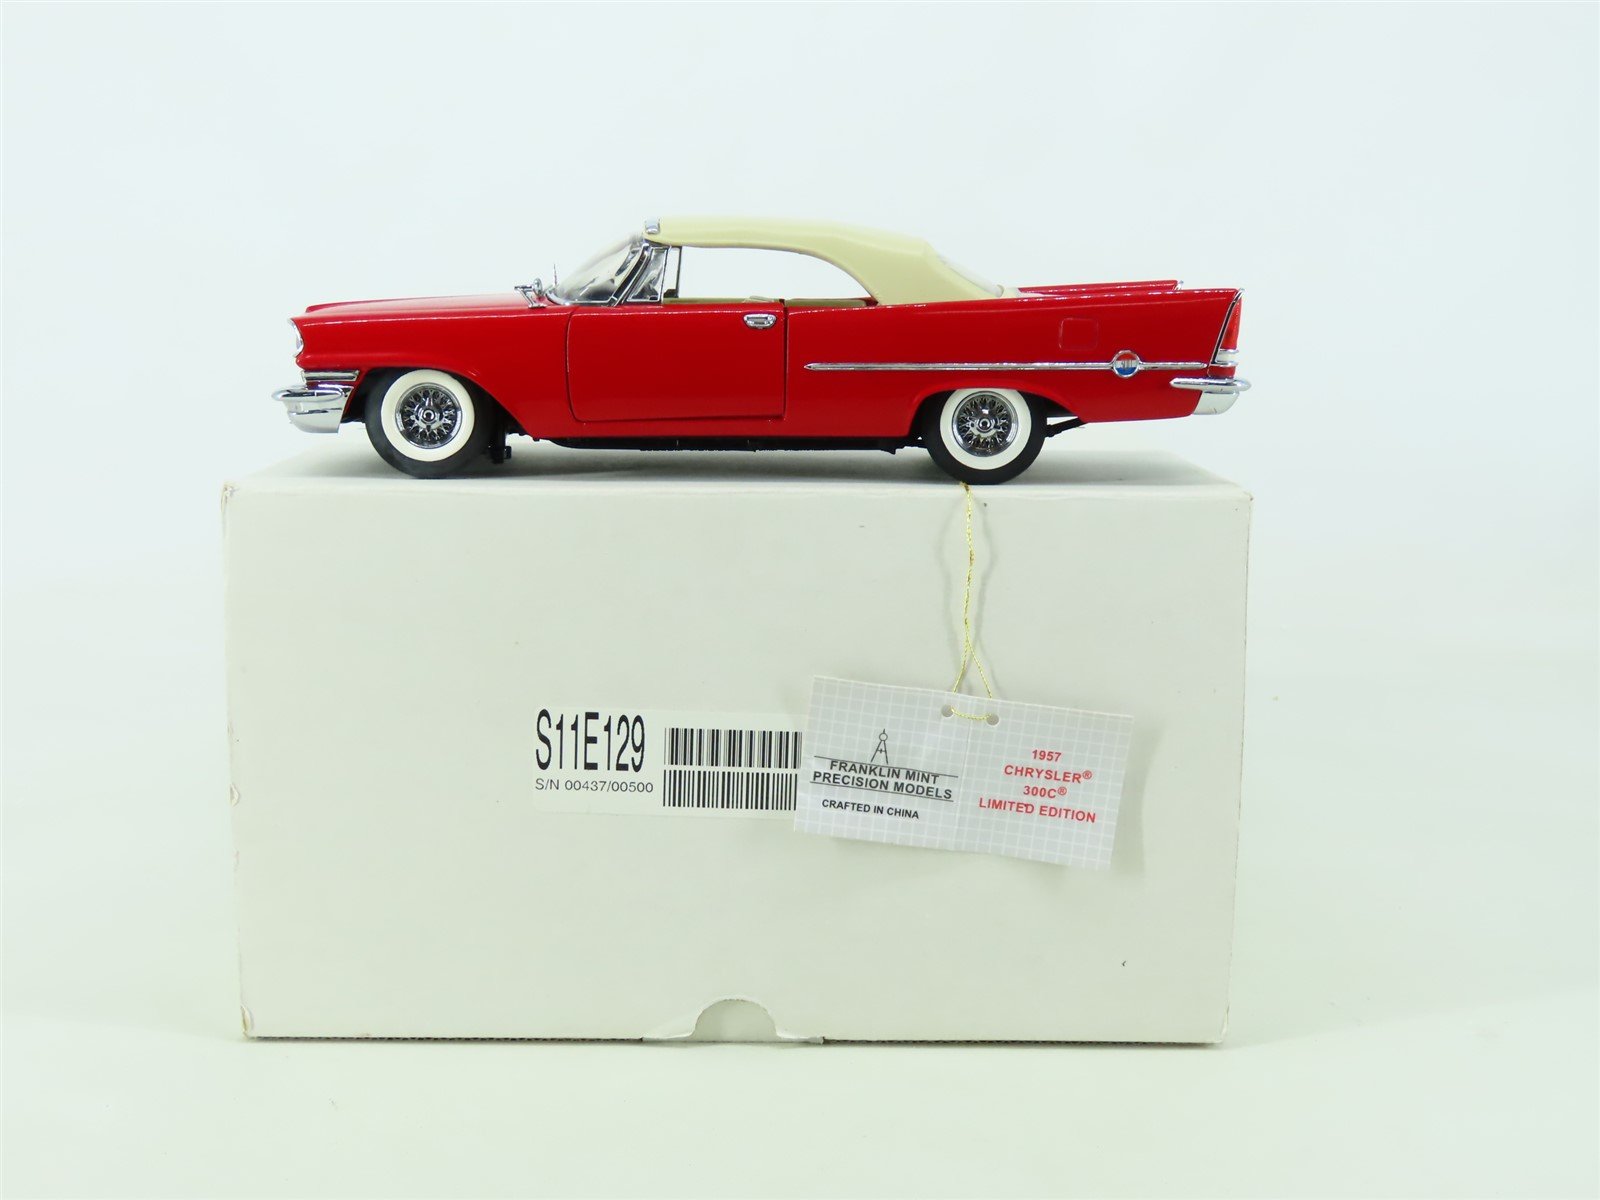 1:24 Scale Franklin Mint #S11E129 Red 1957 Chrysler 300C Convertible